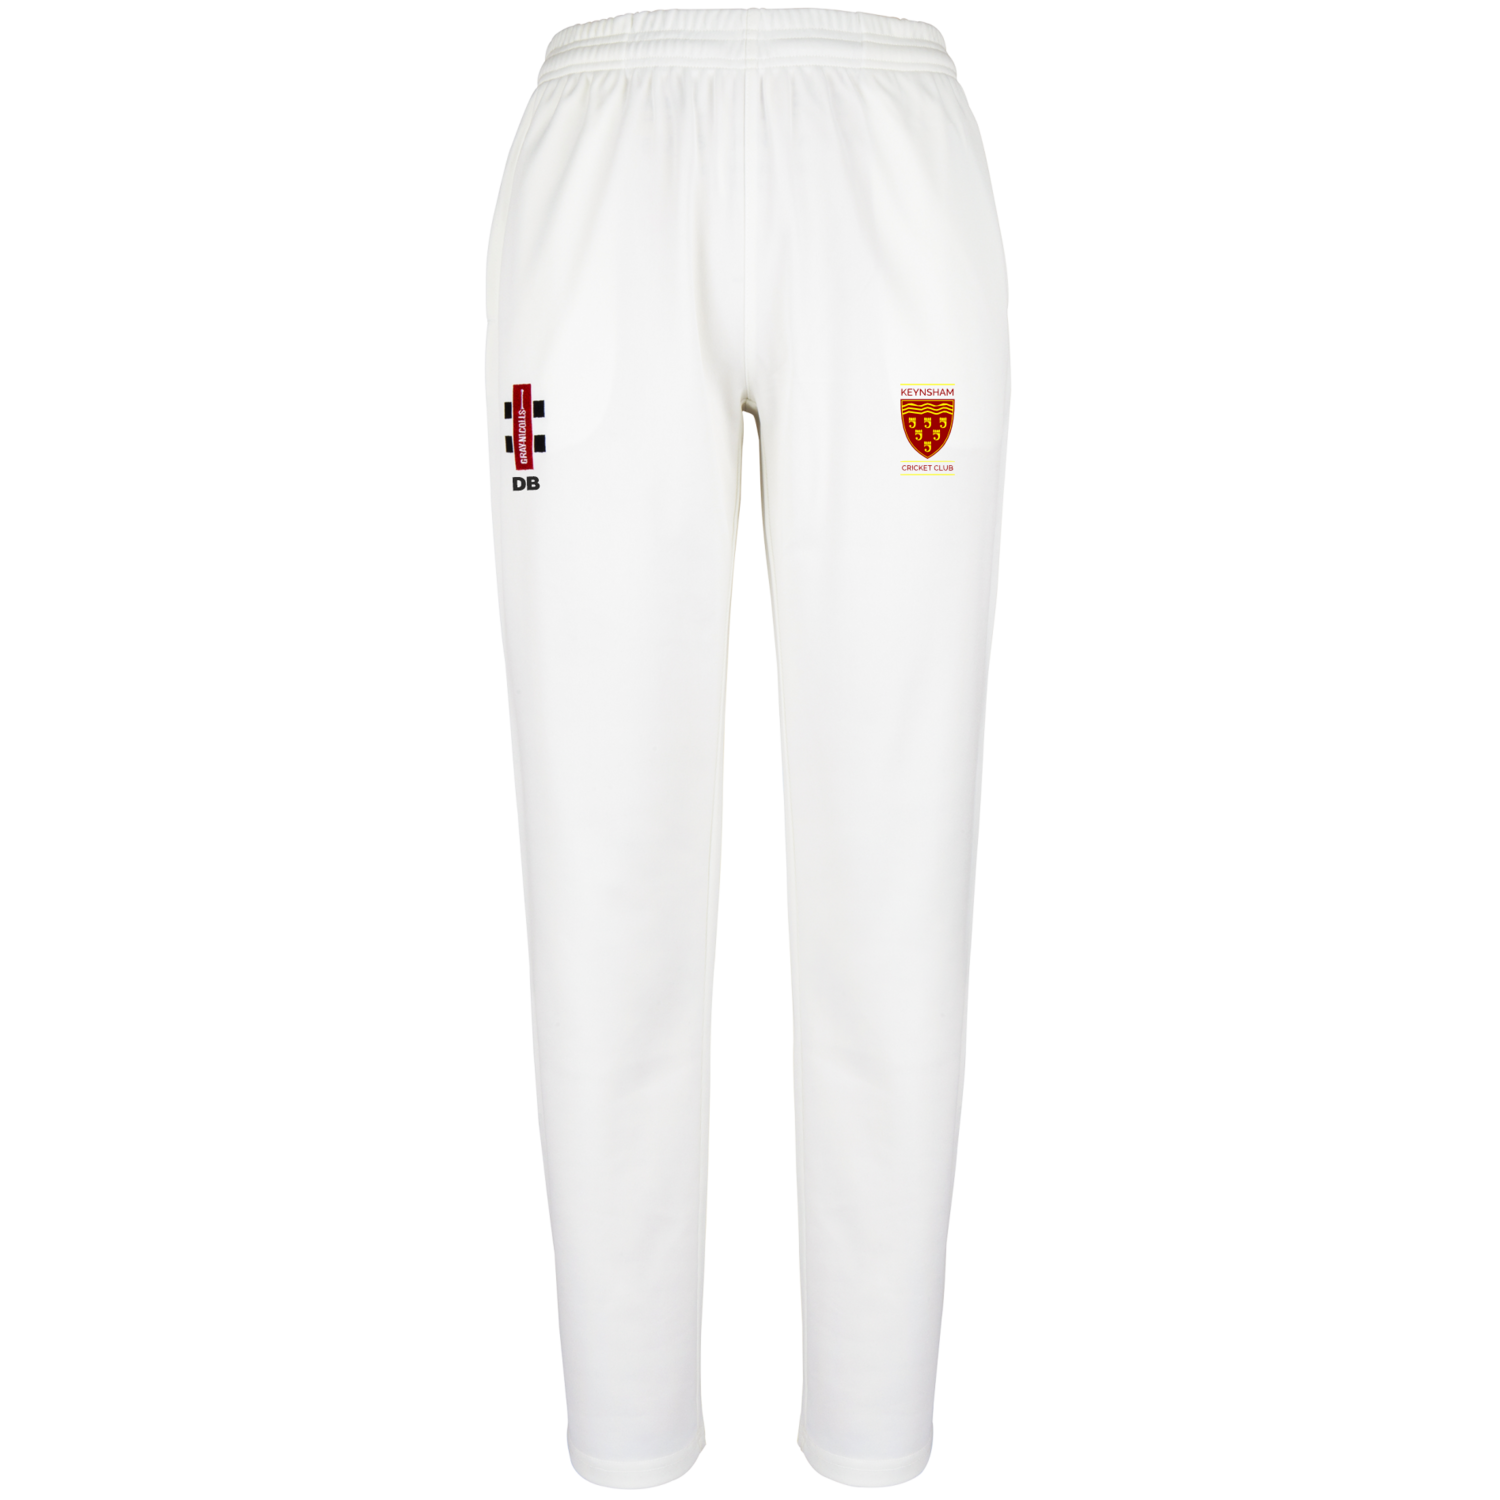 GRAY-NICOLLS PRO PERFORM TROUSERS - Greg Chappell Cricket Centre